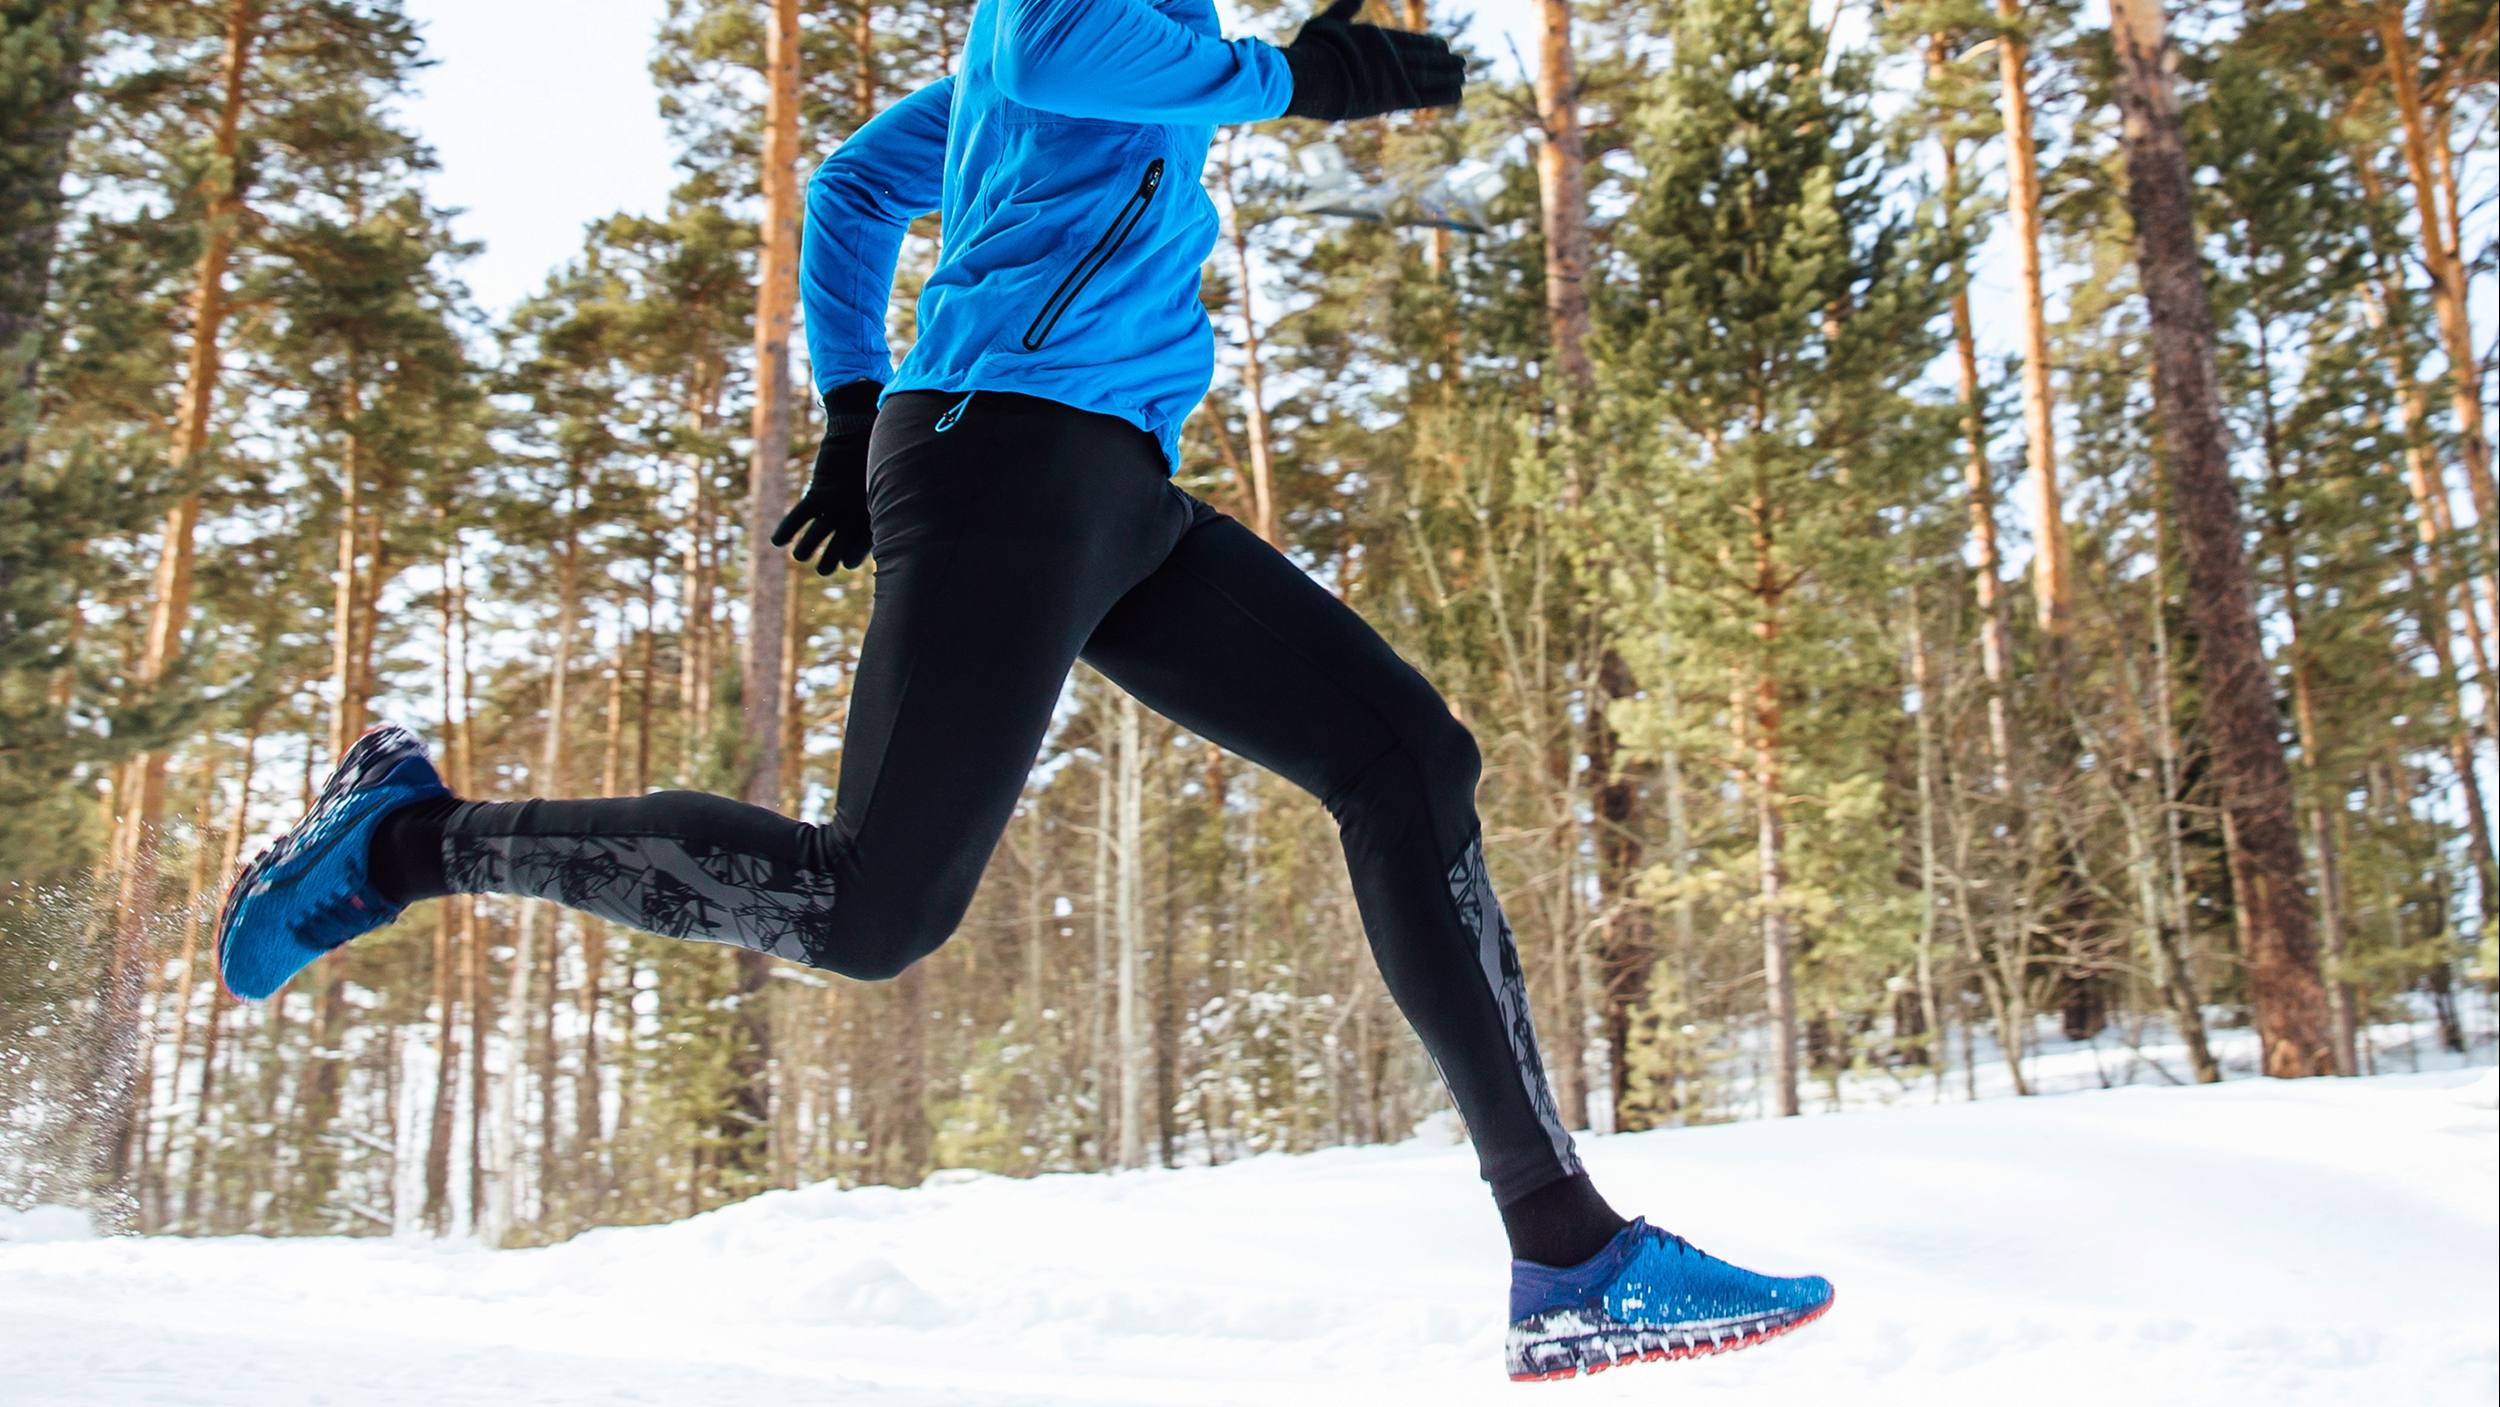 Tuesday Tips: Exercising outdoors in winter - Mayo Clinic News Network